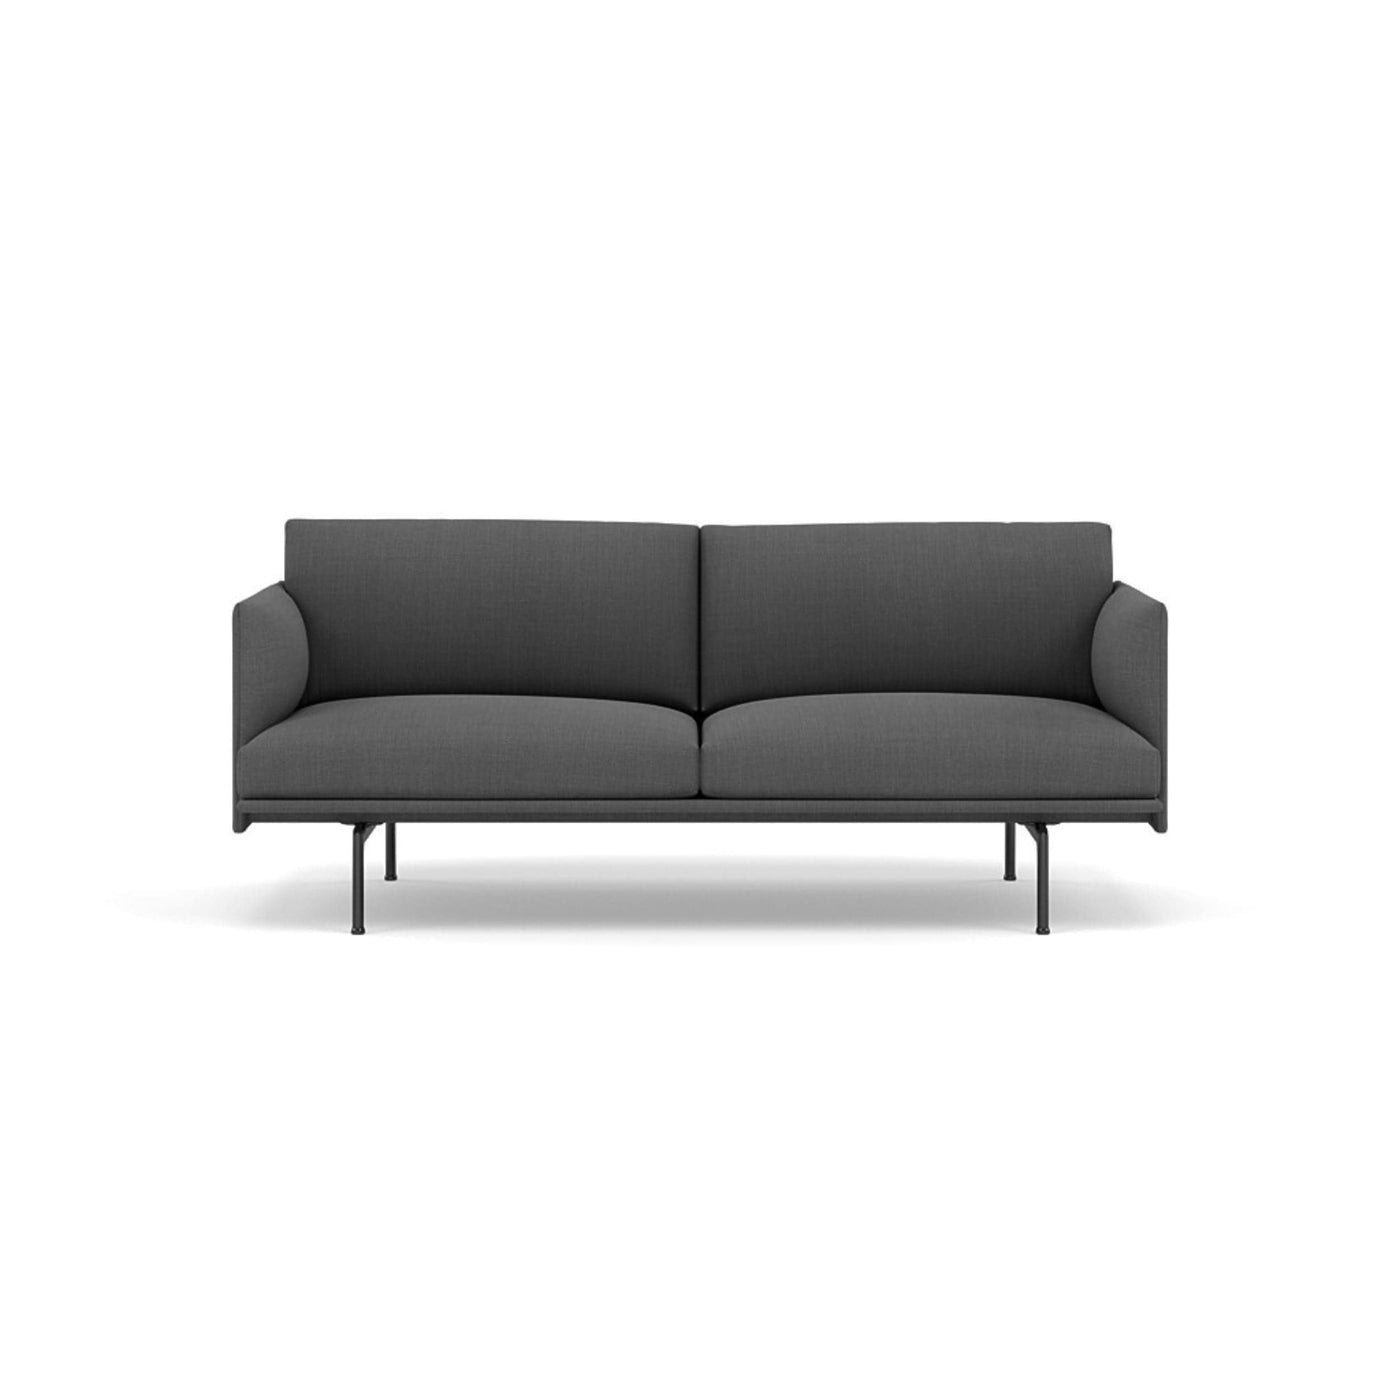 Muuto Outline Studio Sofa 170 in remix 163 and black legs. Made to order from someday designs. #colour_remix-163